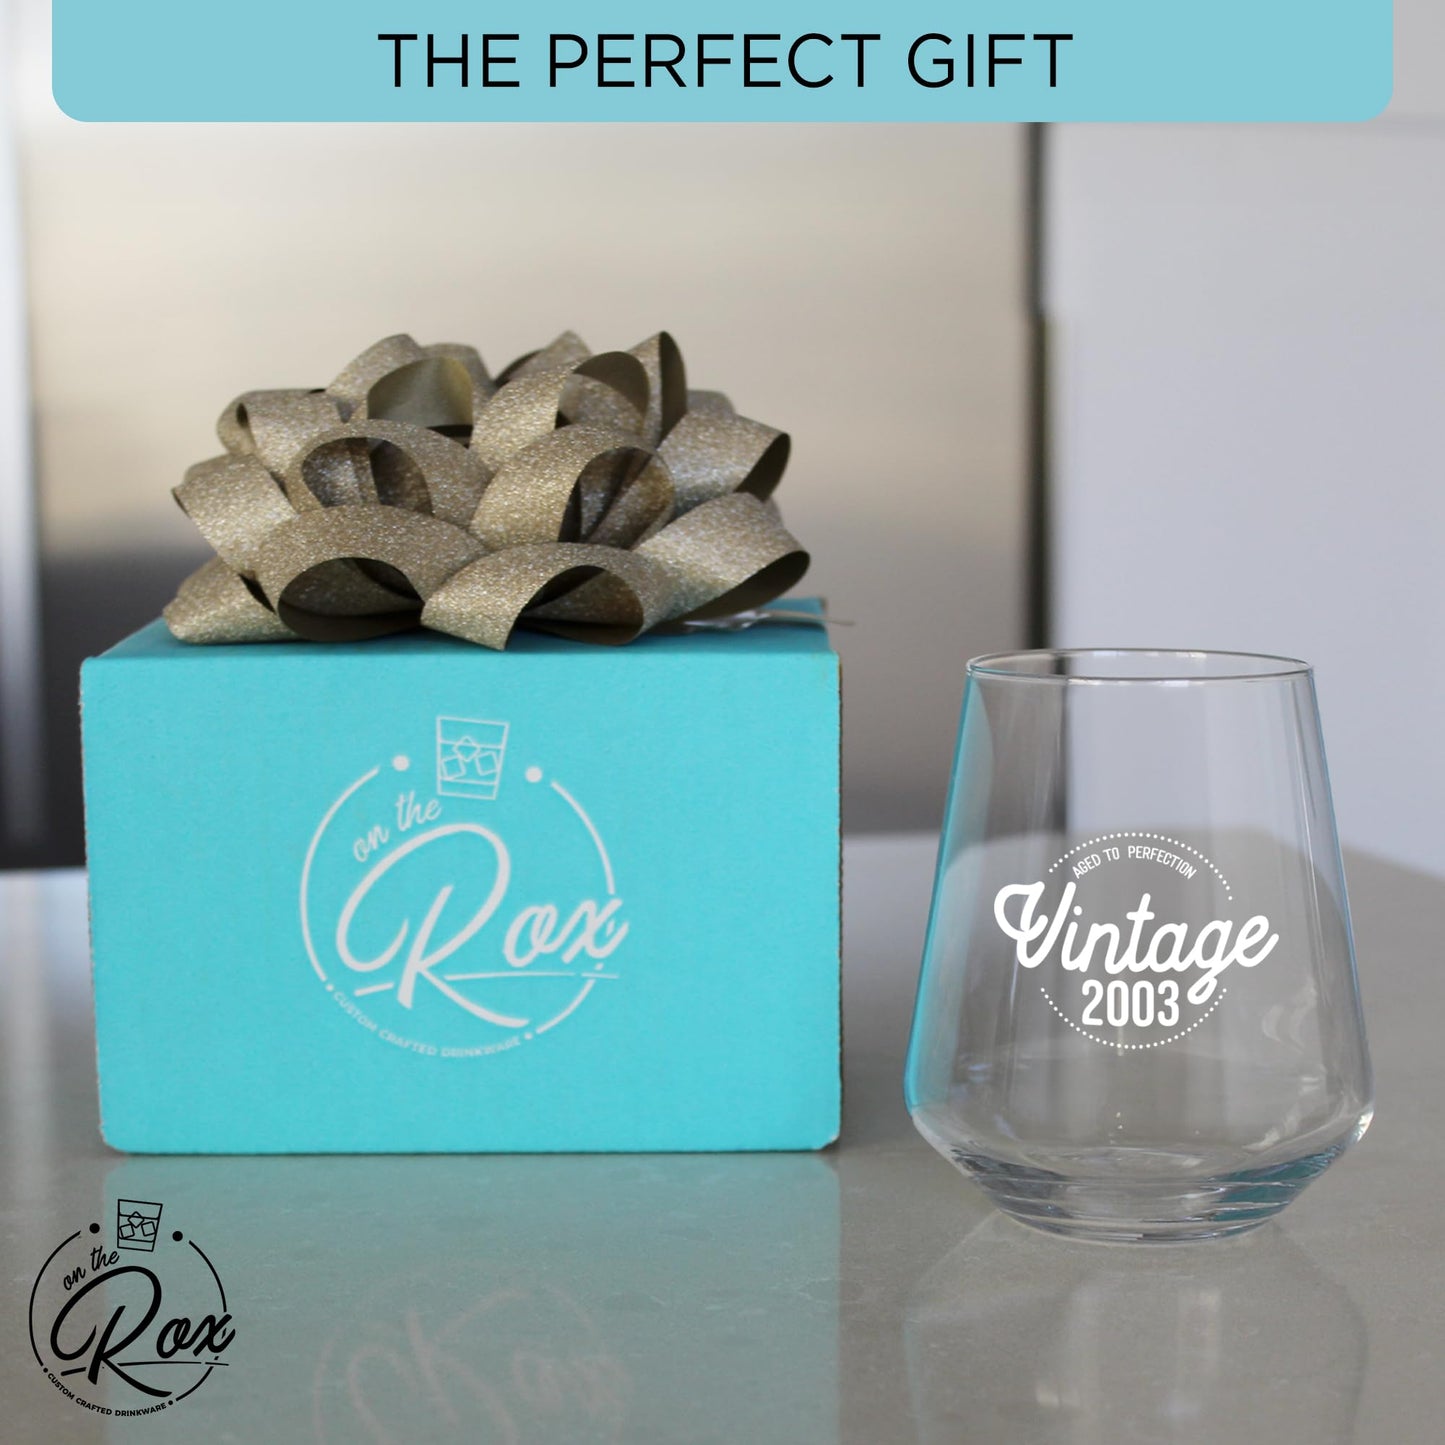 On The Rox Drinks 21st Birthday Gifts for Her - 14oz Vintage 2003 Wine Glass - 21st Birthday Decorations for Women - 21st Anniversary Ideas for Her, Mom, Wife - 21 Years Gifts